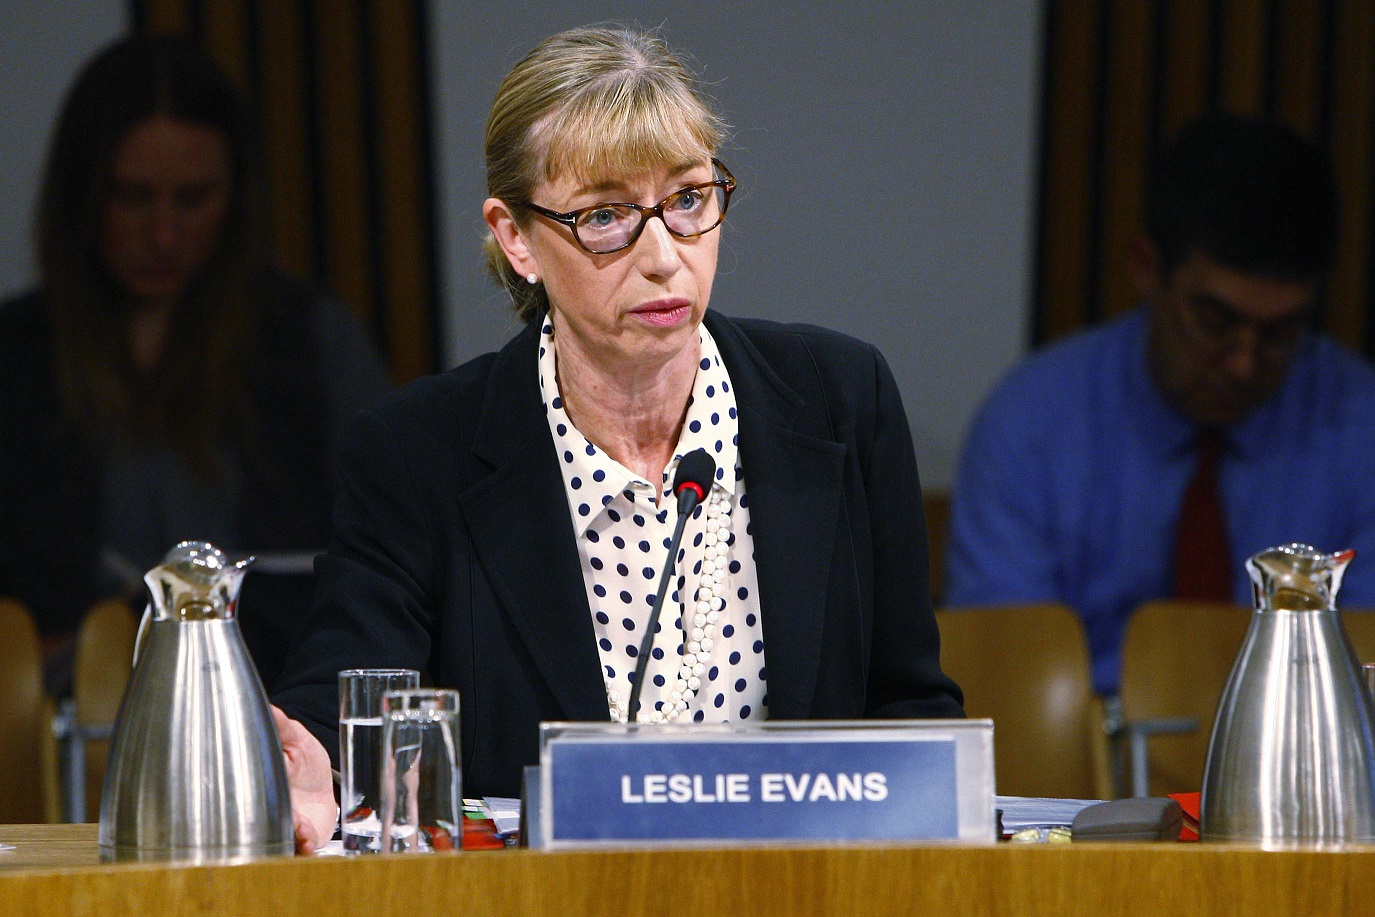 Permanent Secretary Leslie Evans giving evidence to the Committee